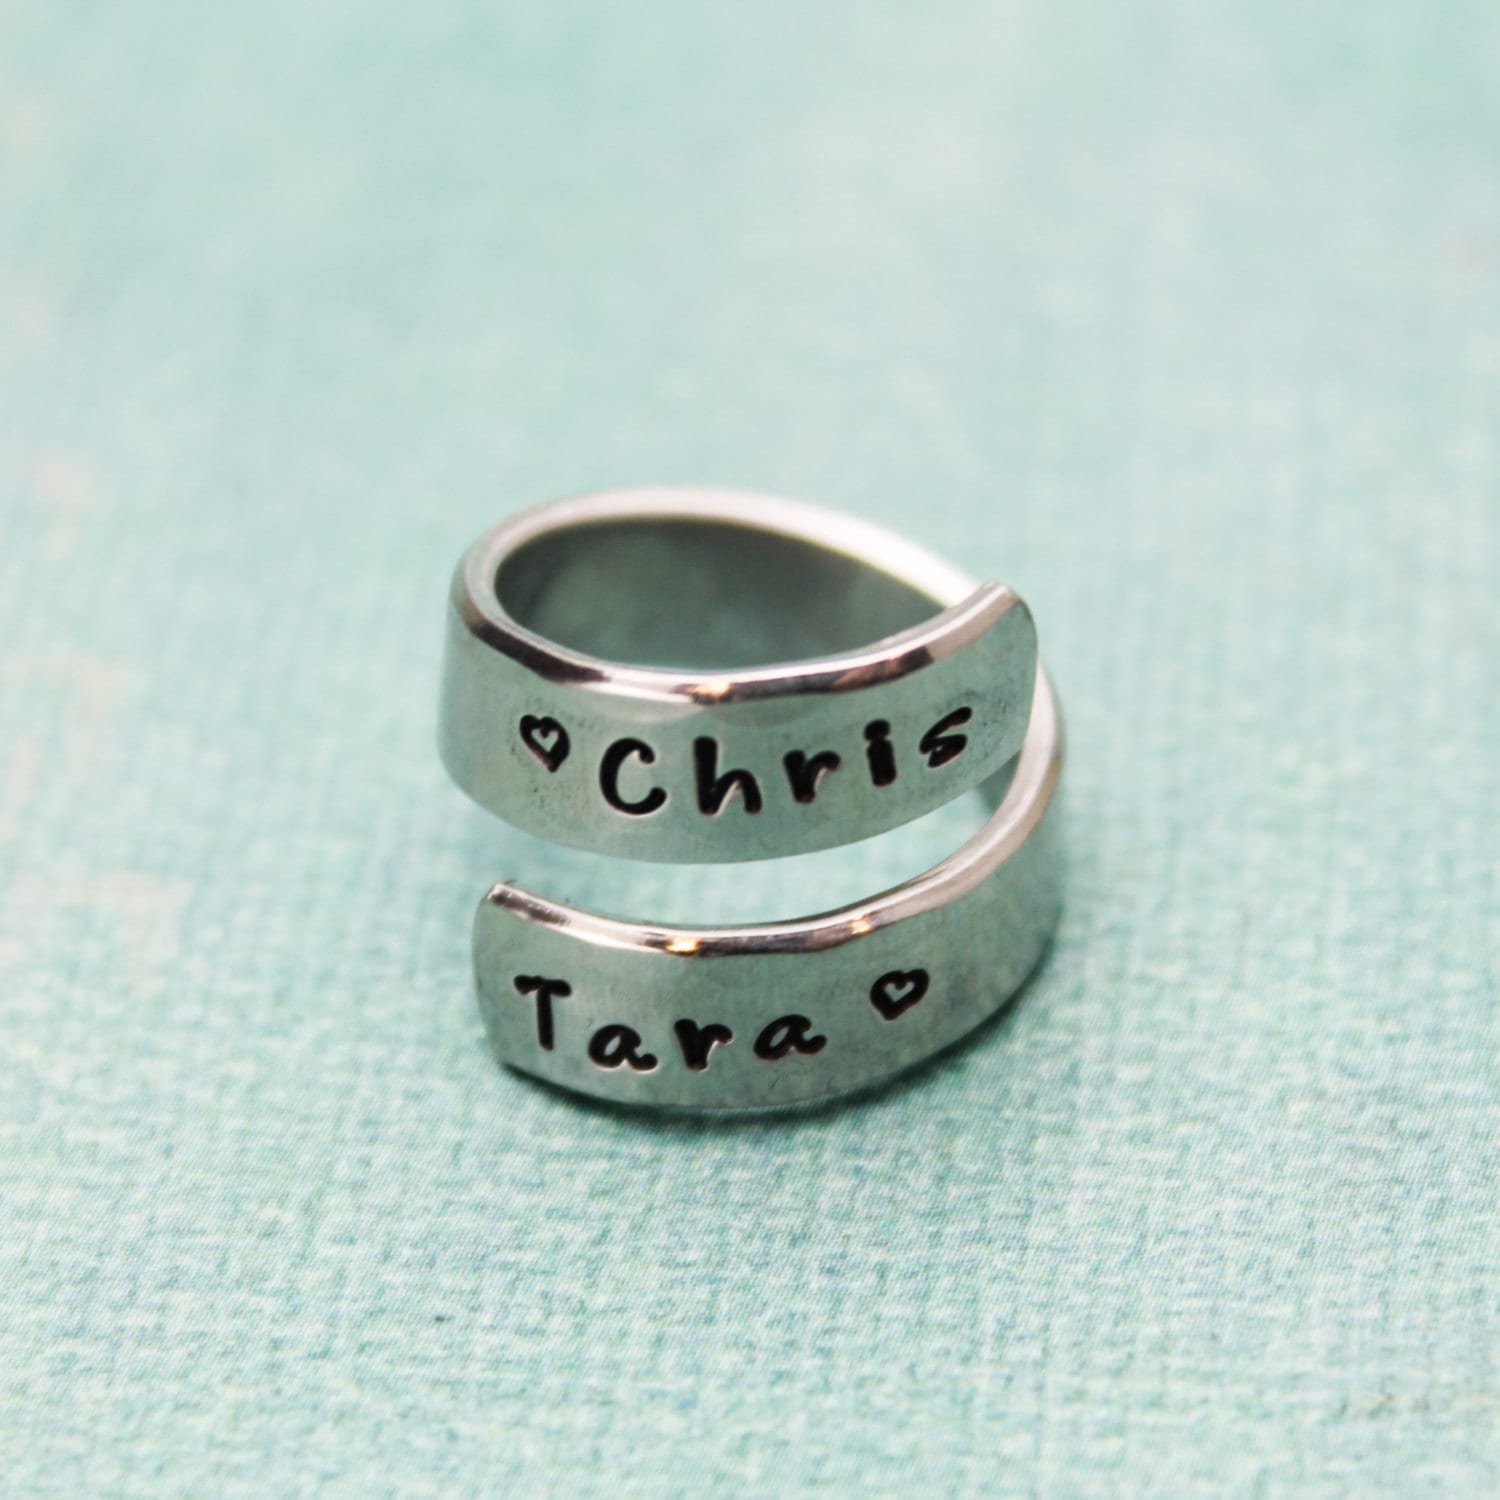 Personalized Wrap Ring - Hand Stamped Aluminum